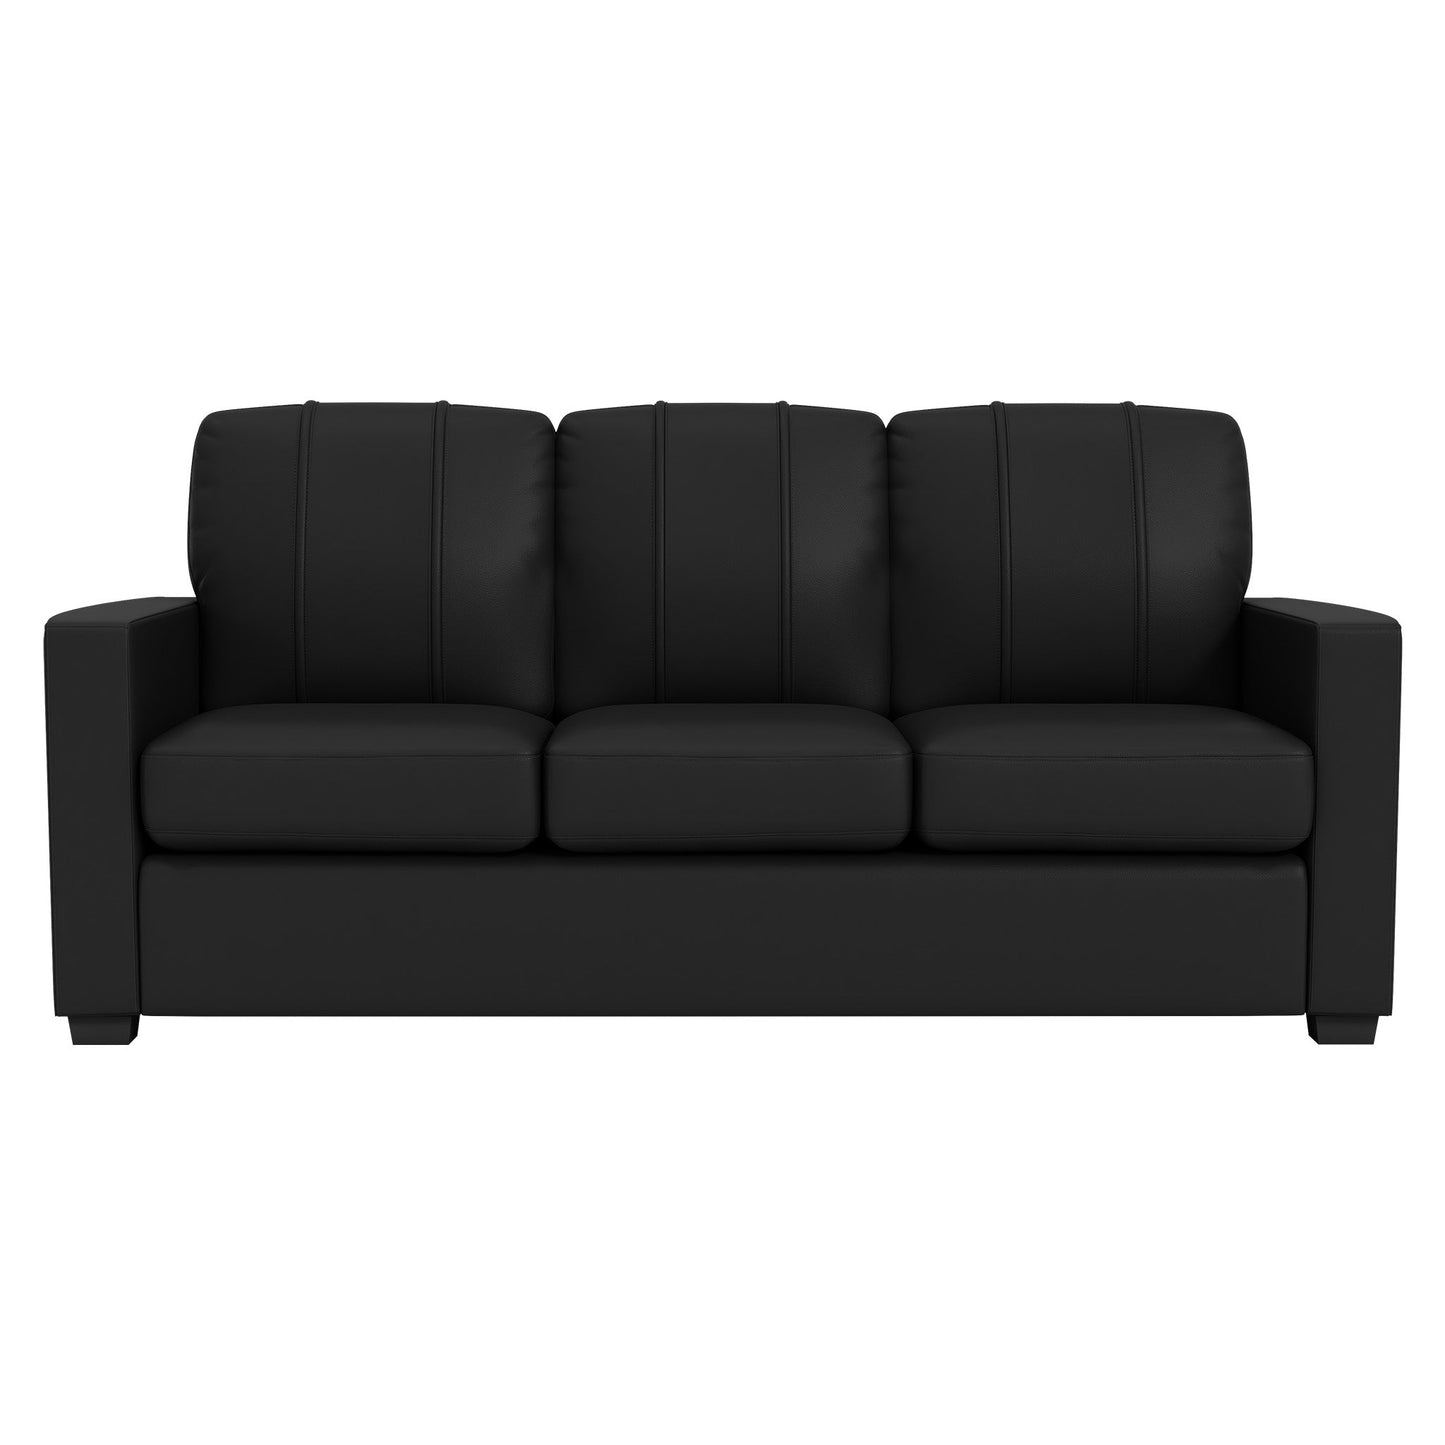 Silver Sofa with San Francisco Giants Champs'12